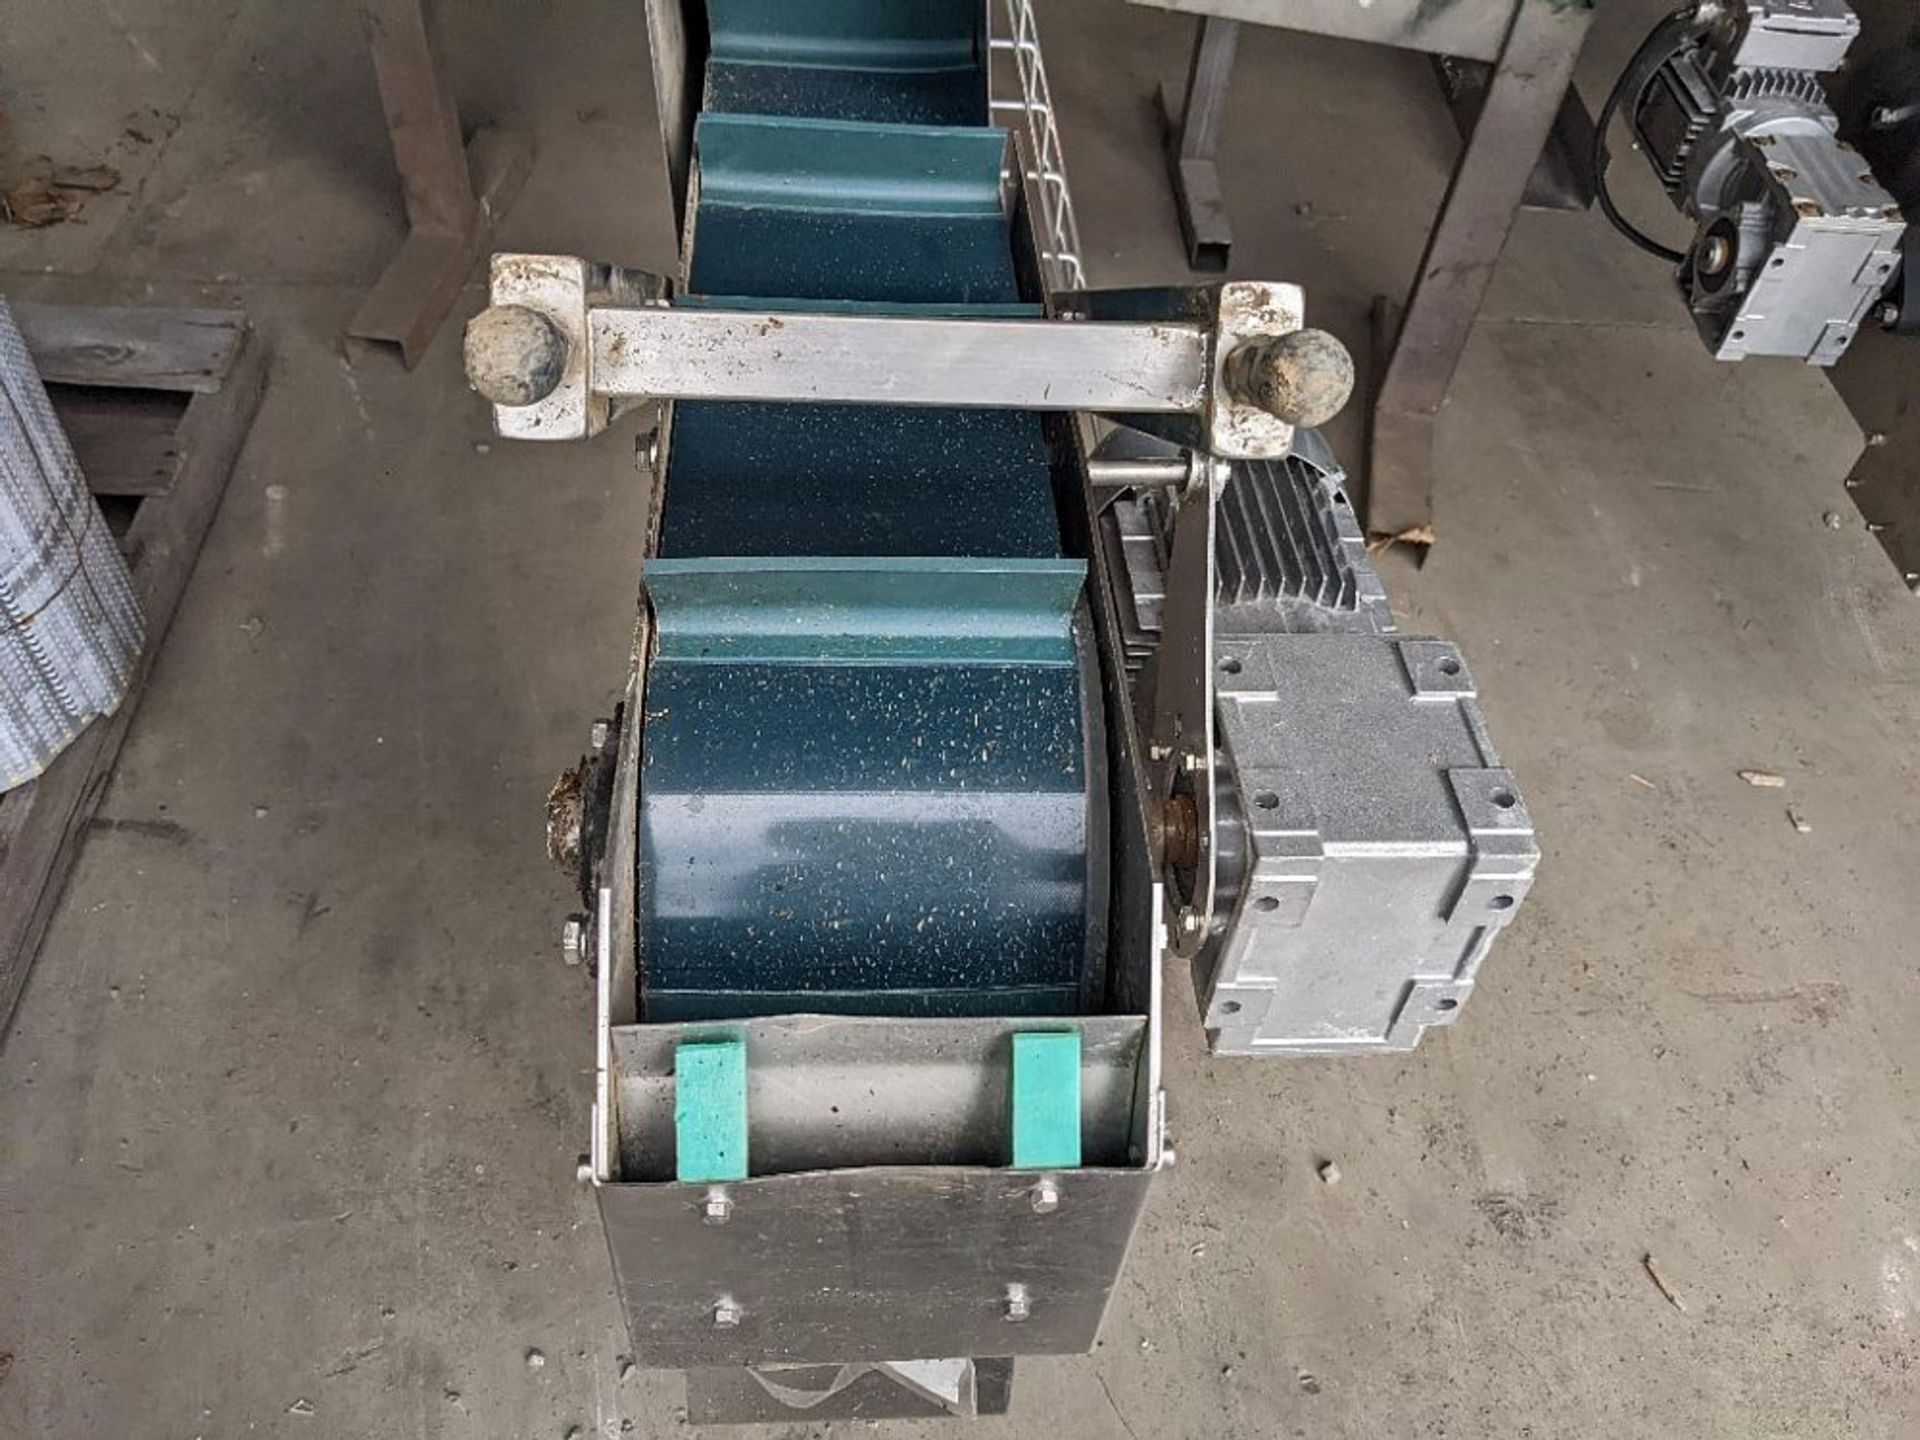 Gassner Cleated Belt Conveyor - 6" W Belt - 2" Tall Cleates - 348" L - Motor: SEW-Euro Drive 240/ - Image 5 of 7